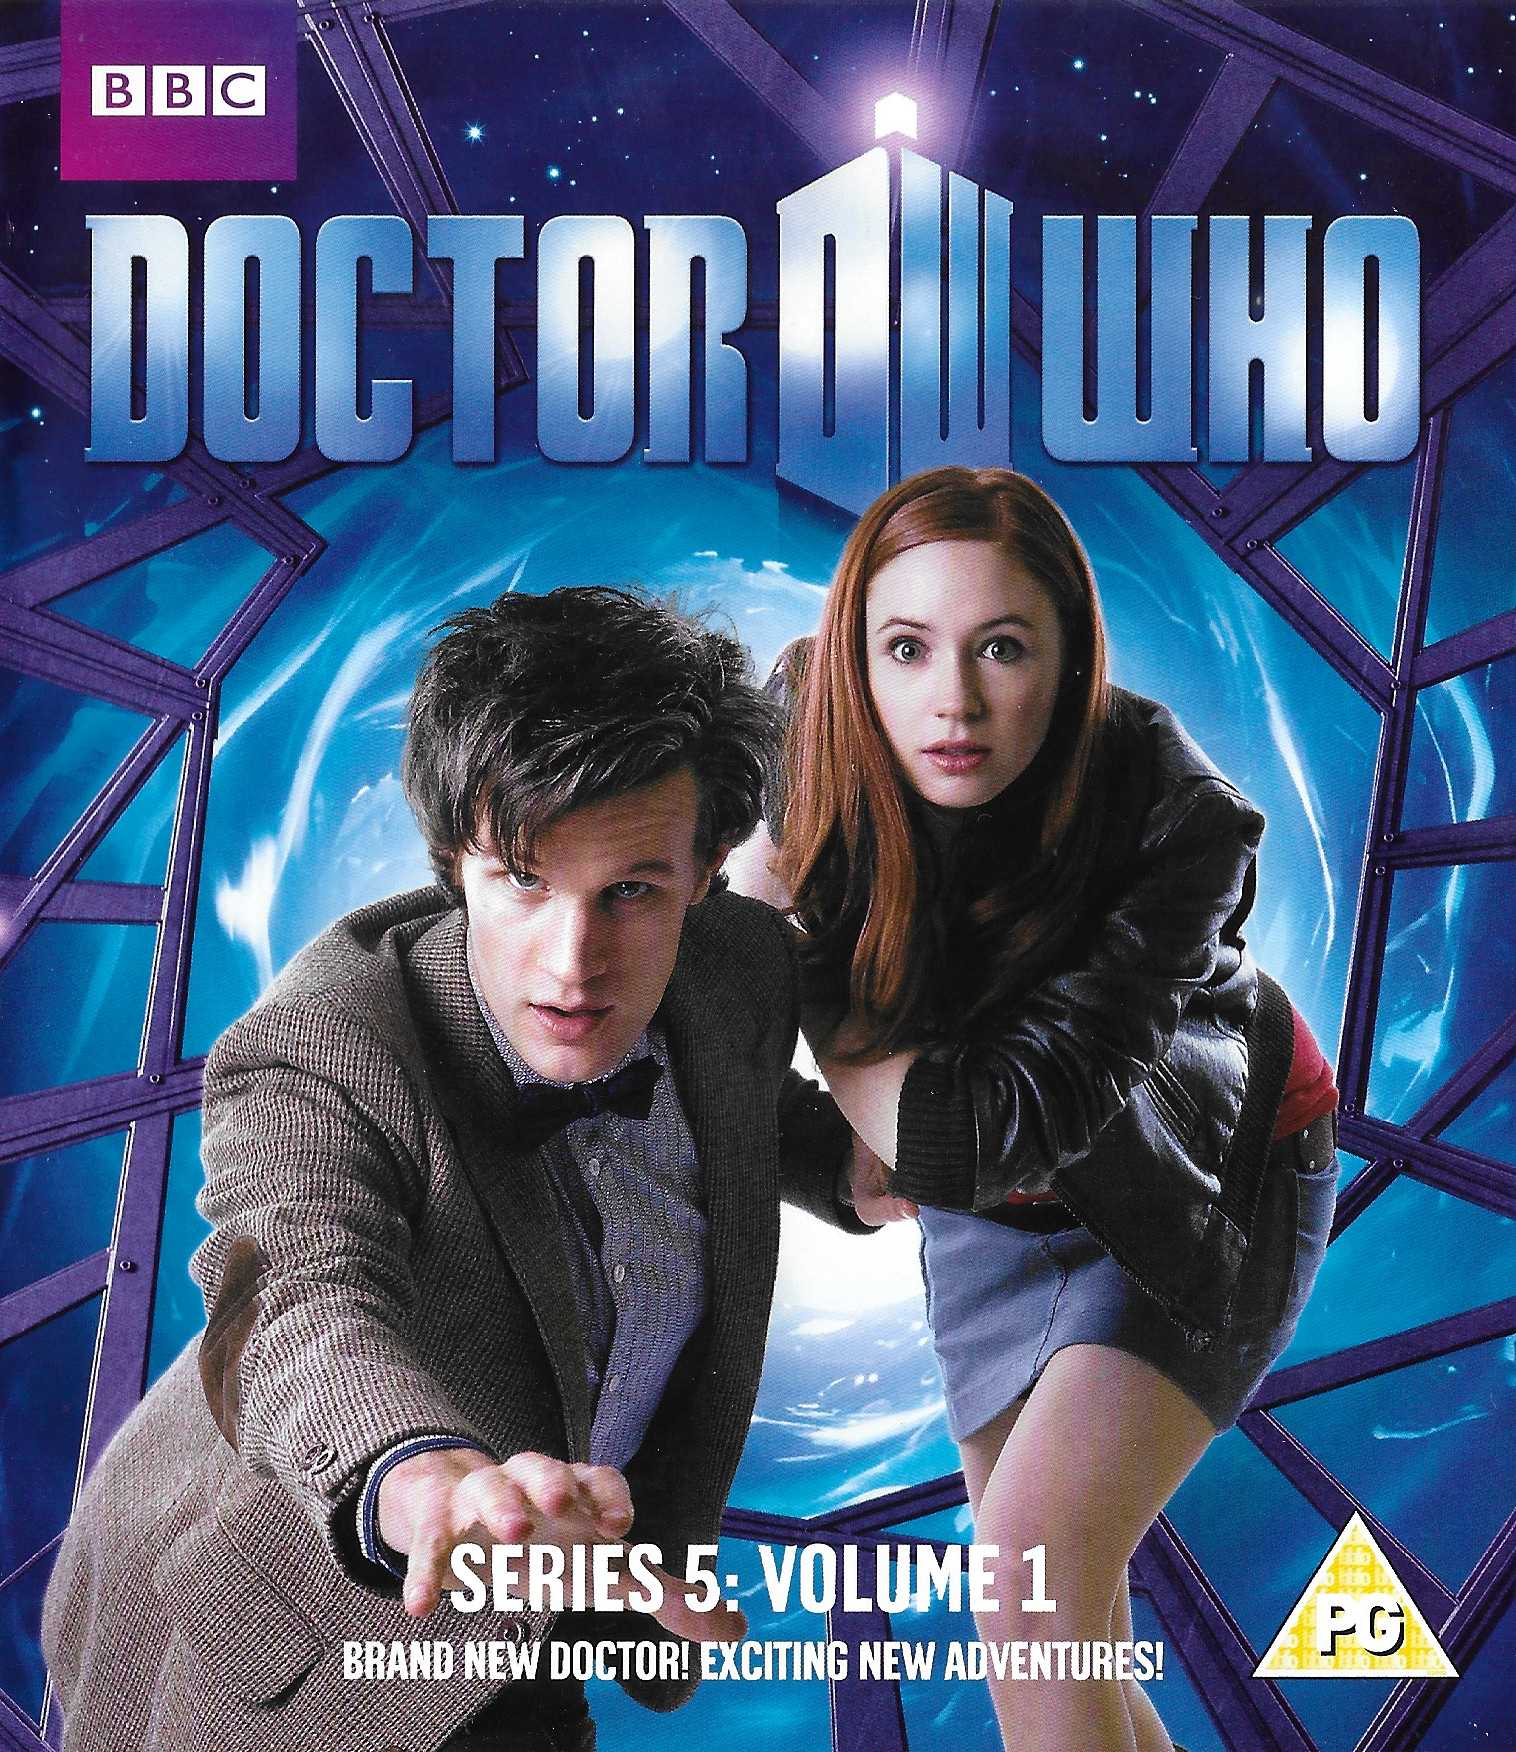 Picture of BBCBD 0082 Doctor Who - Series 5, volume 1 by artist Steven Moffat / Mark Gatiss from the BBC blu-rays - Records and Tapes library